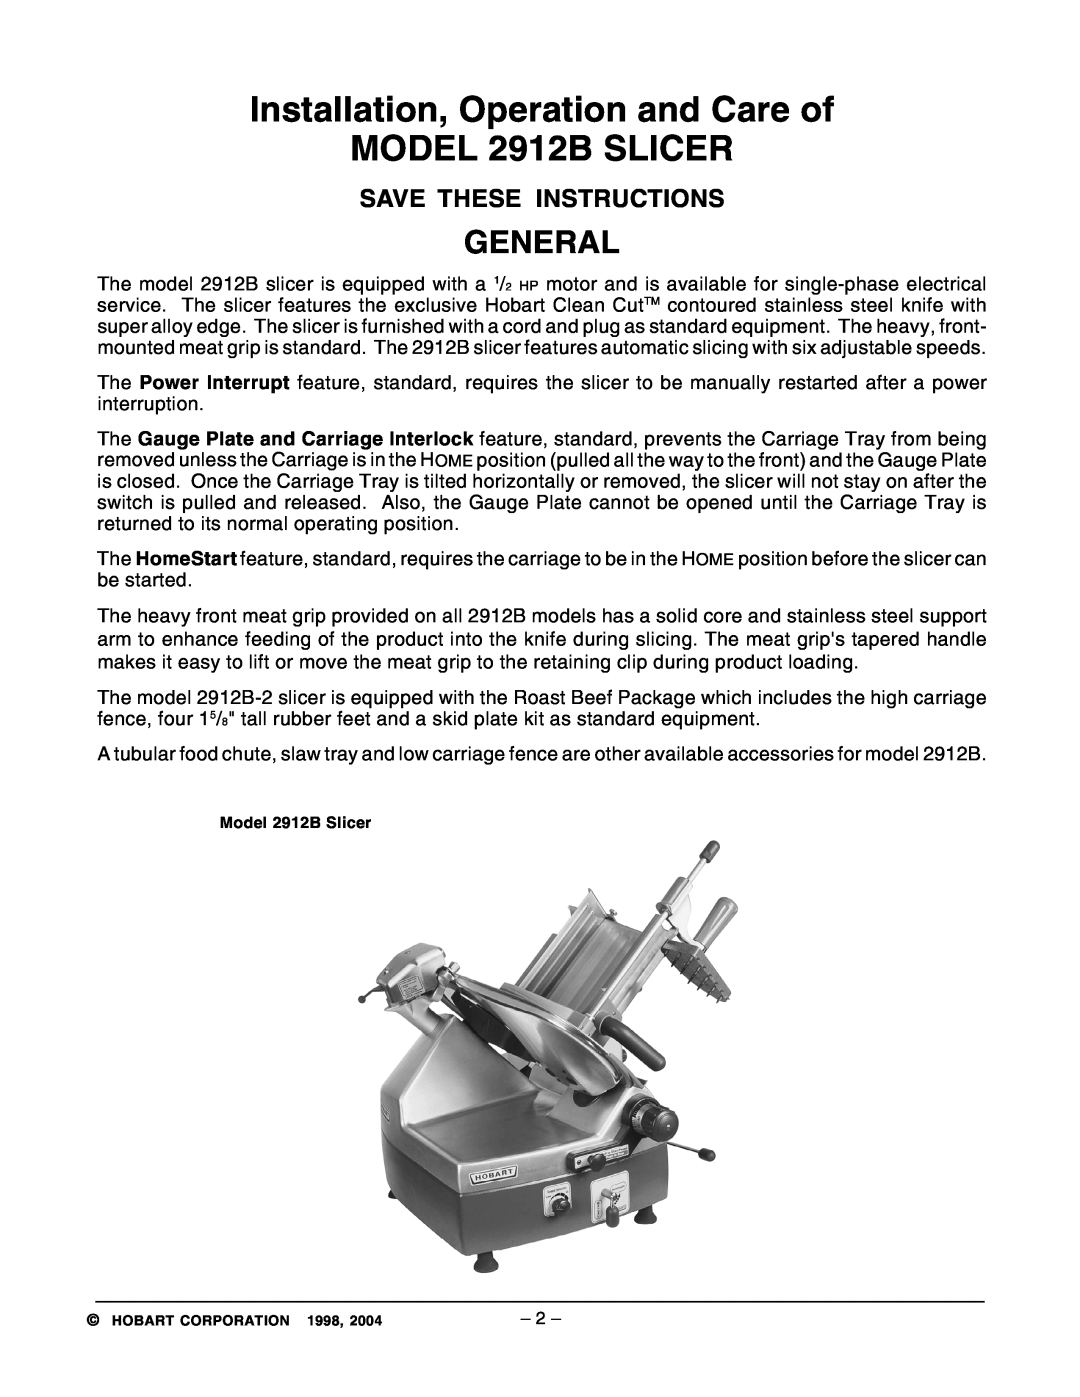 Hobart ML-134252 manual General, Installation, Operation and Care of, MODEL 2912B SLICER, Save These Instructions 